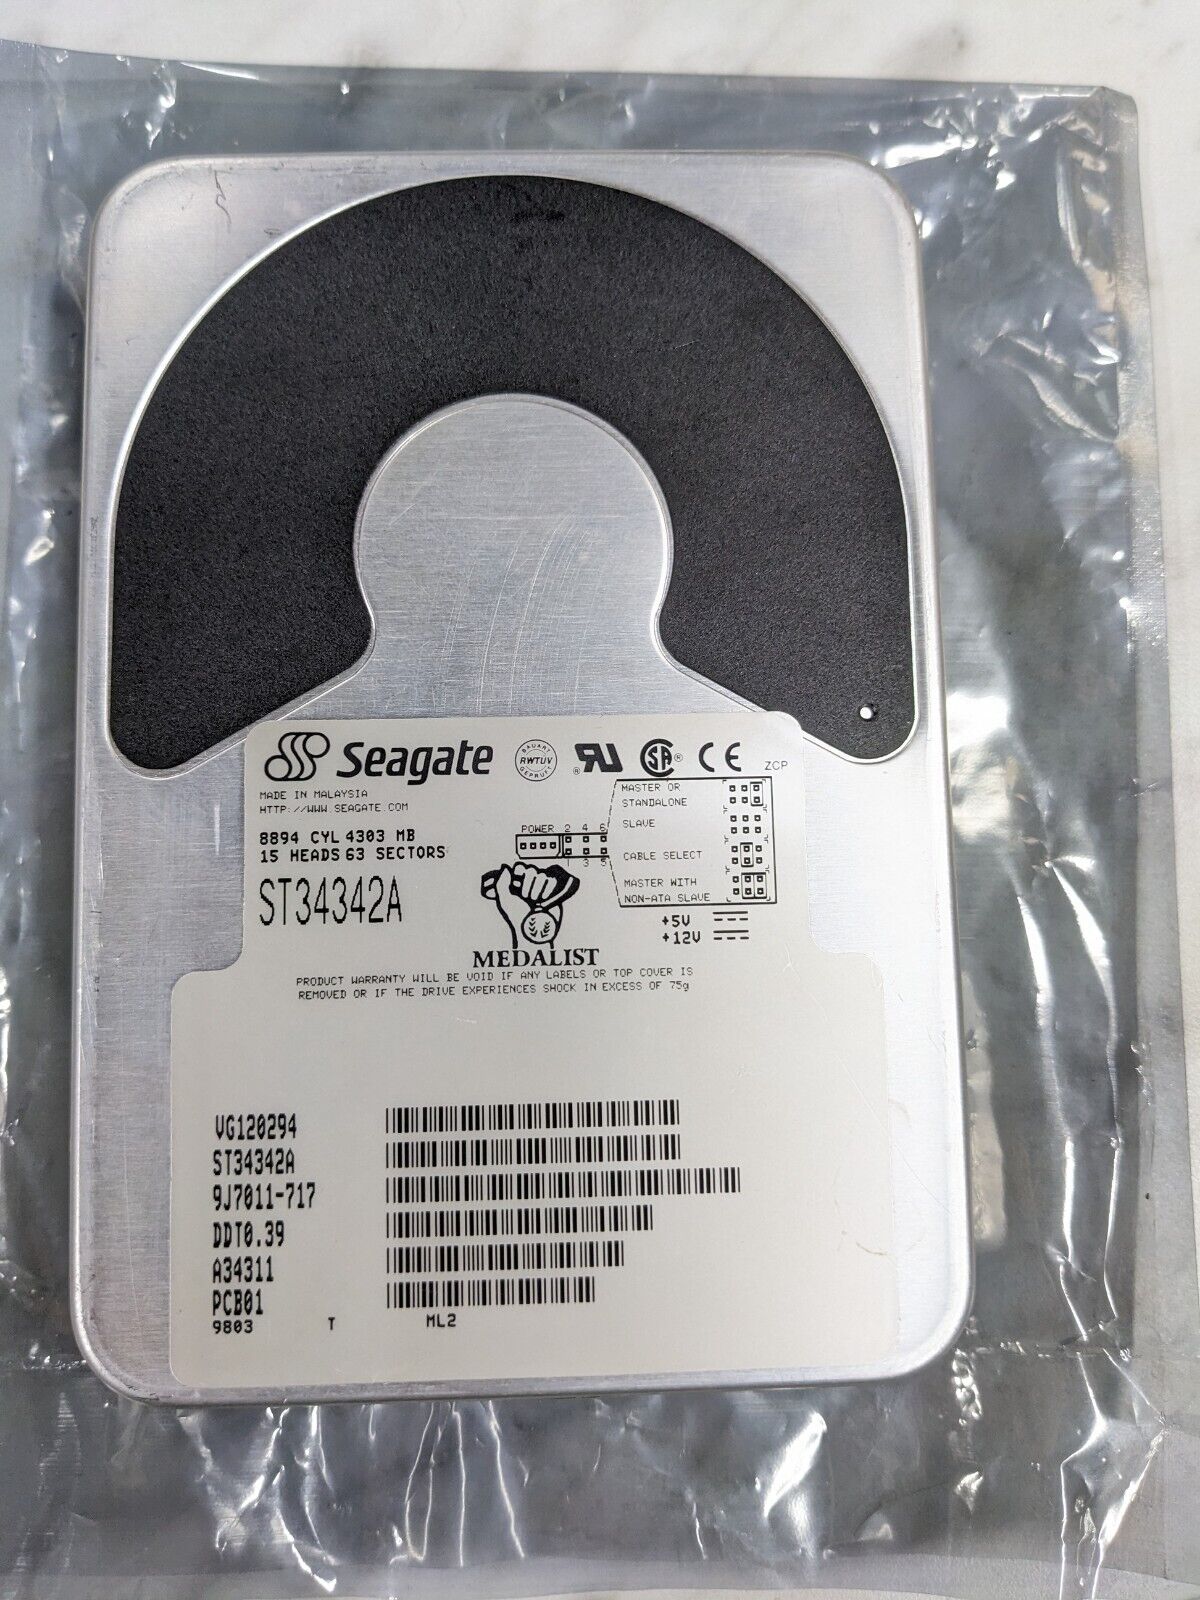 SEAGATE ST34342A 4303 MB 4.3 GB MEDALIST VG120294 VINTAGE PC HARD DISK DRIVE